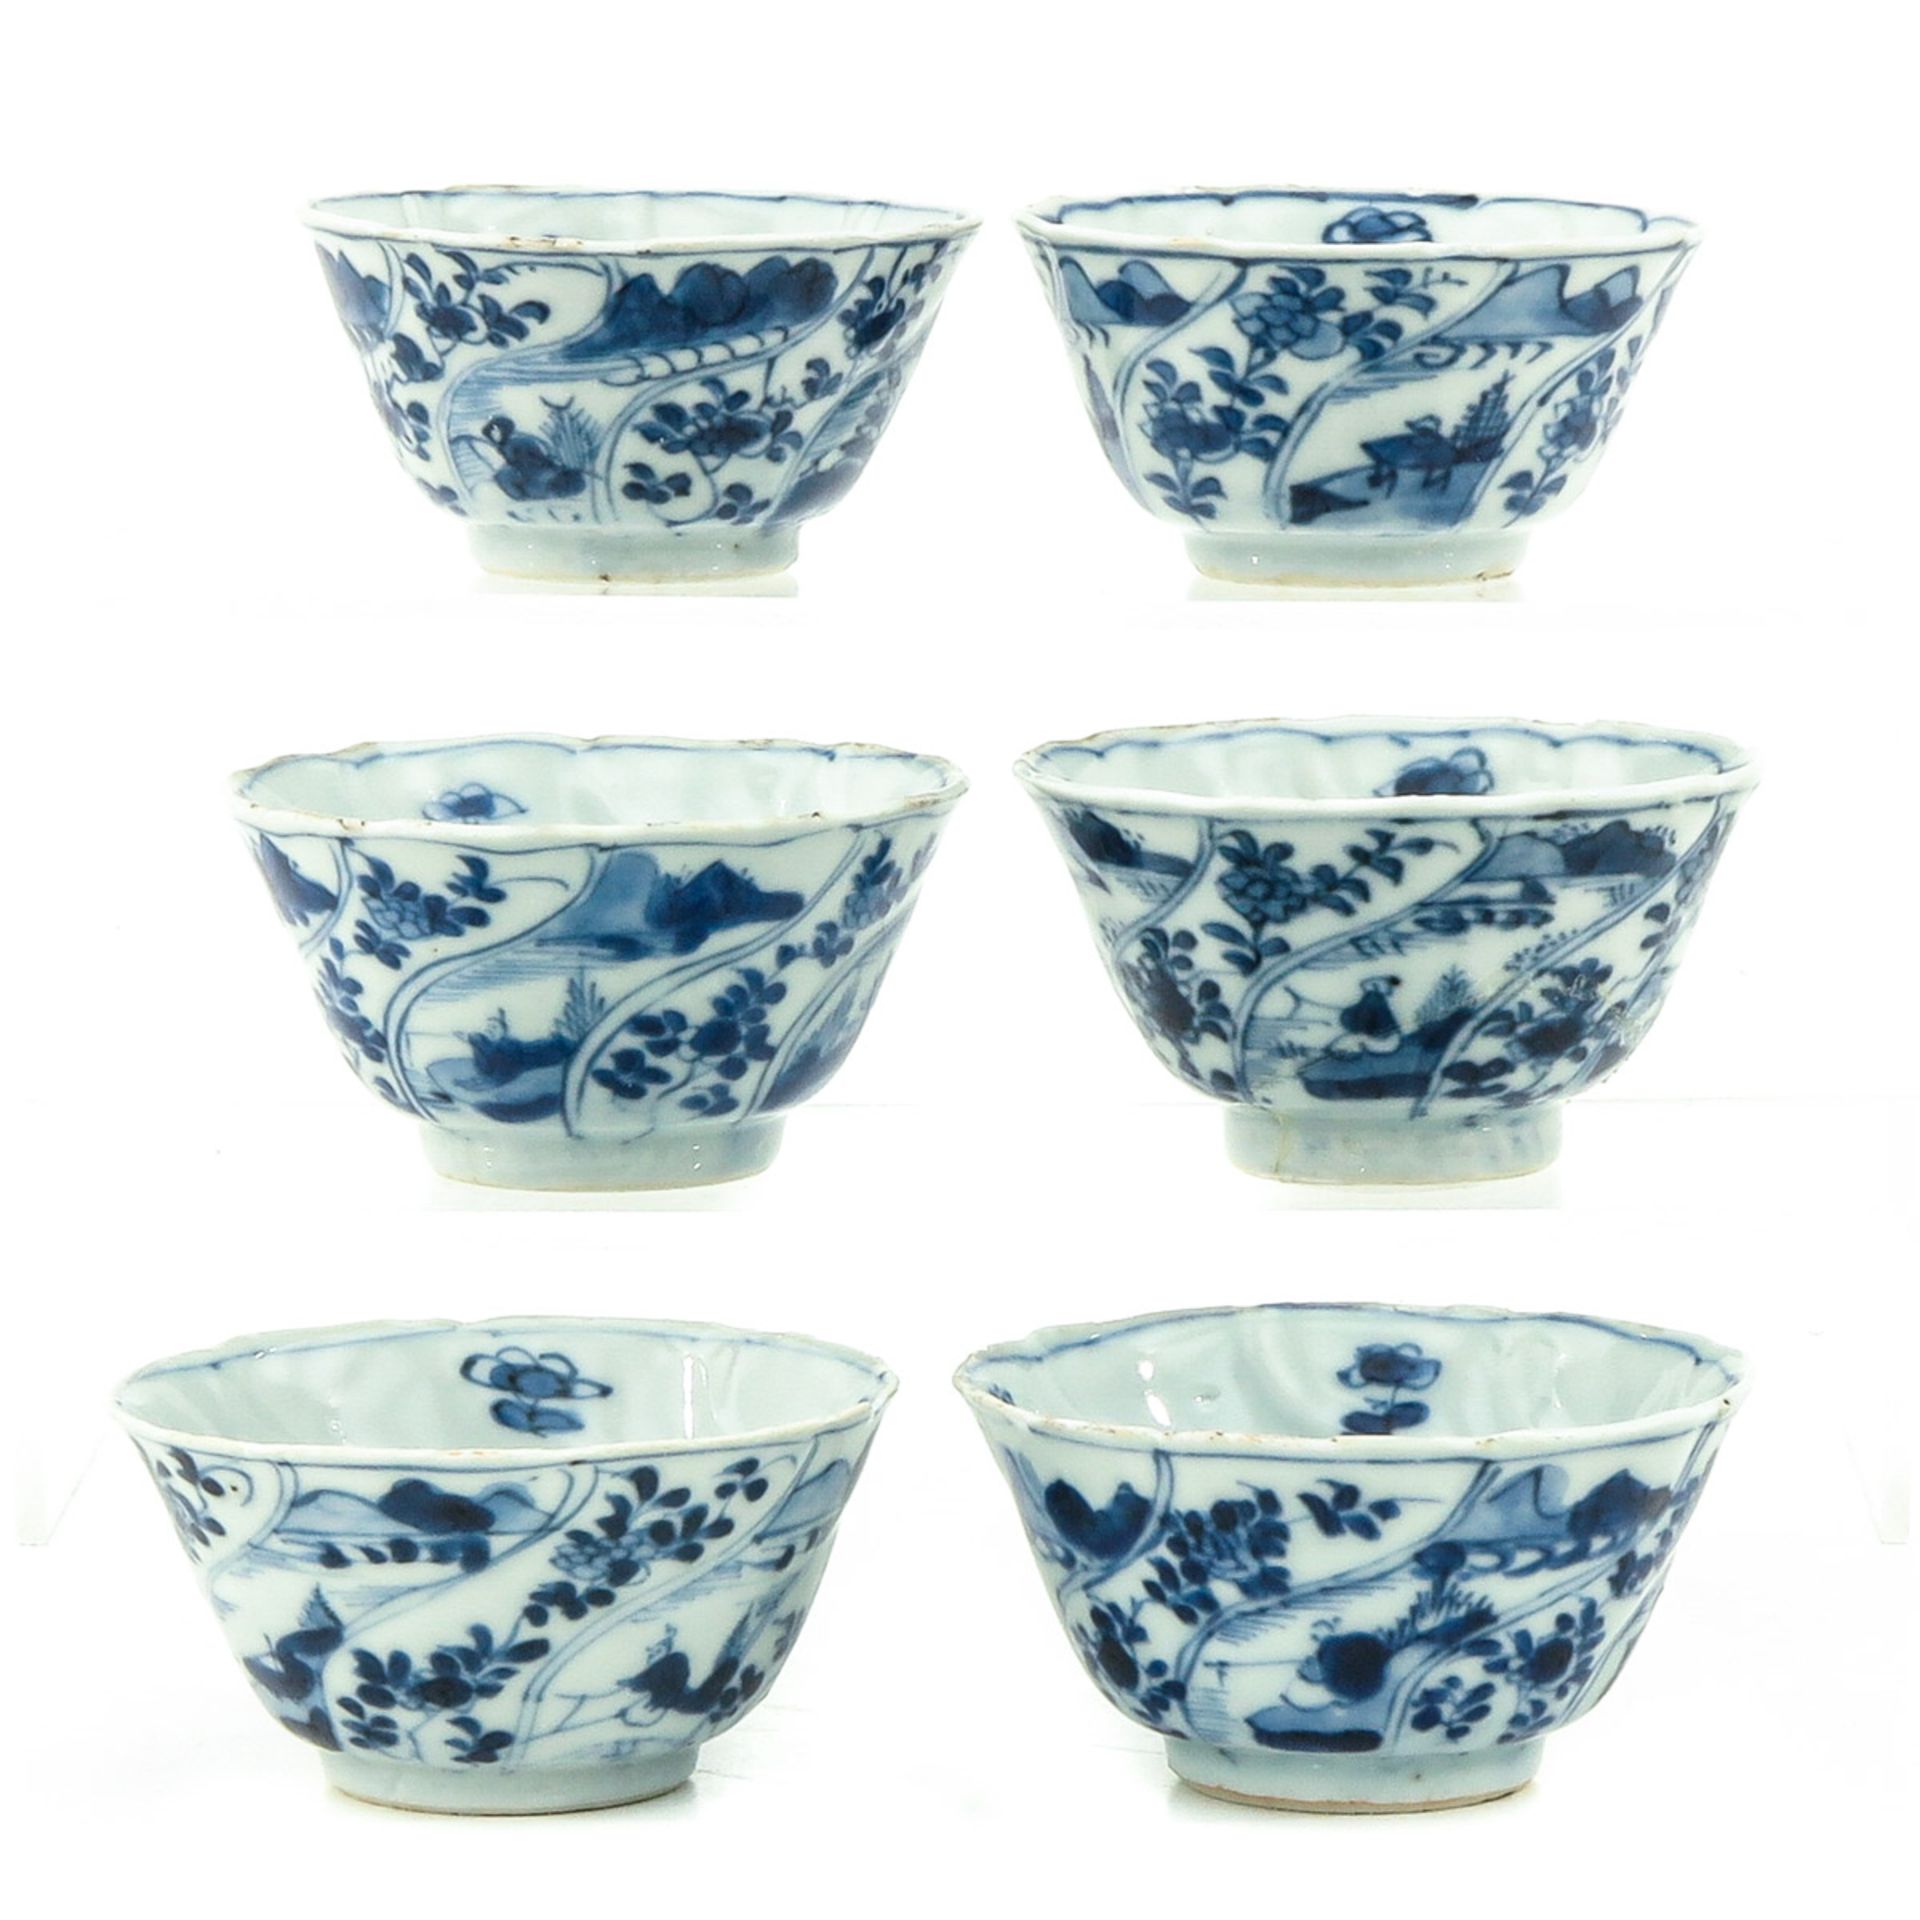 A Series of 6 Cups and Saucers - Image 4 of 10